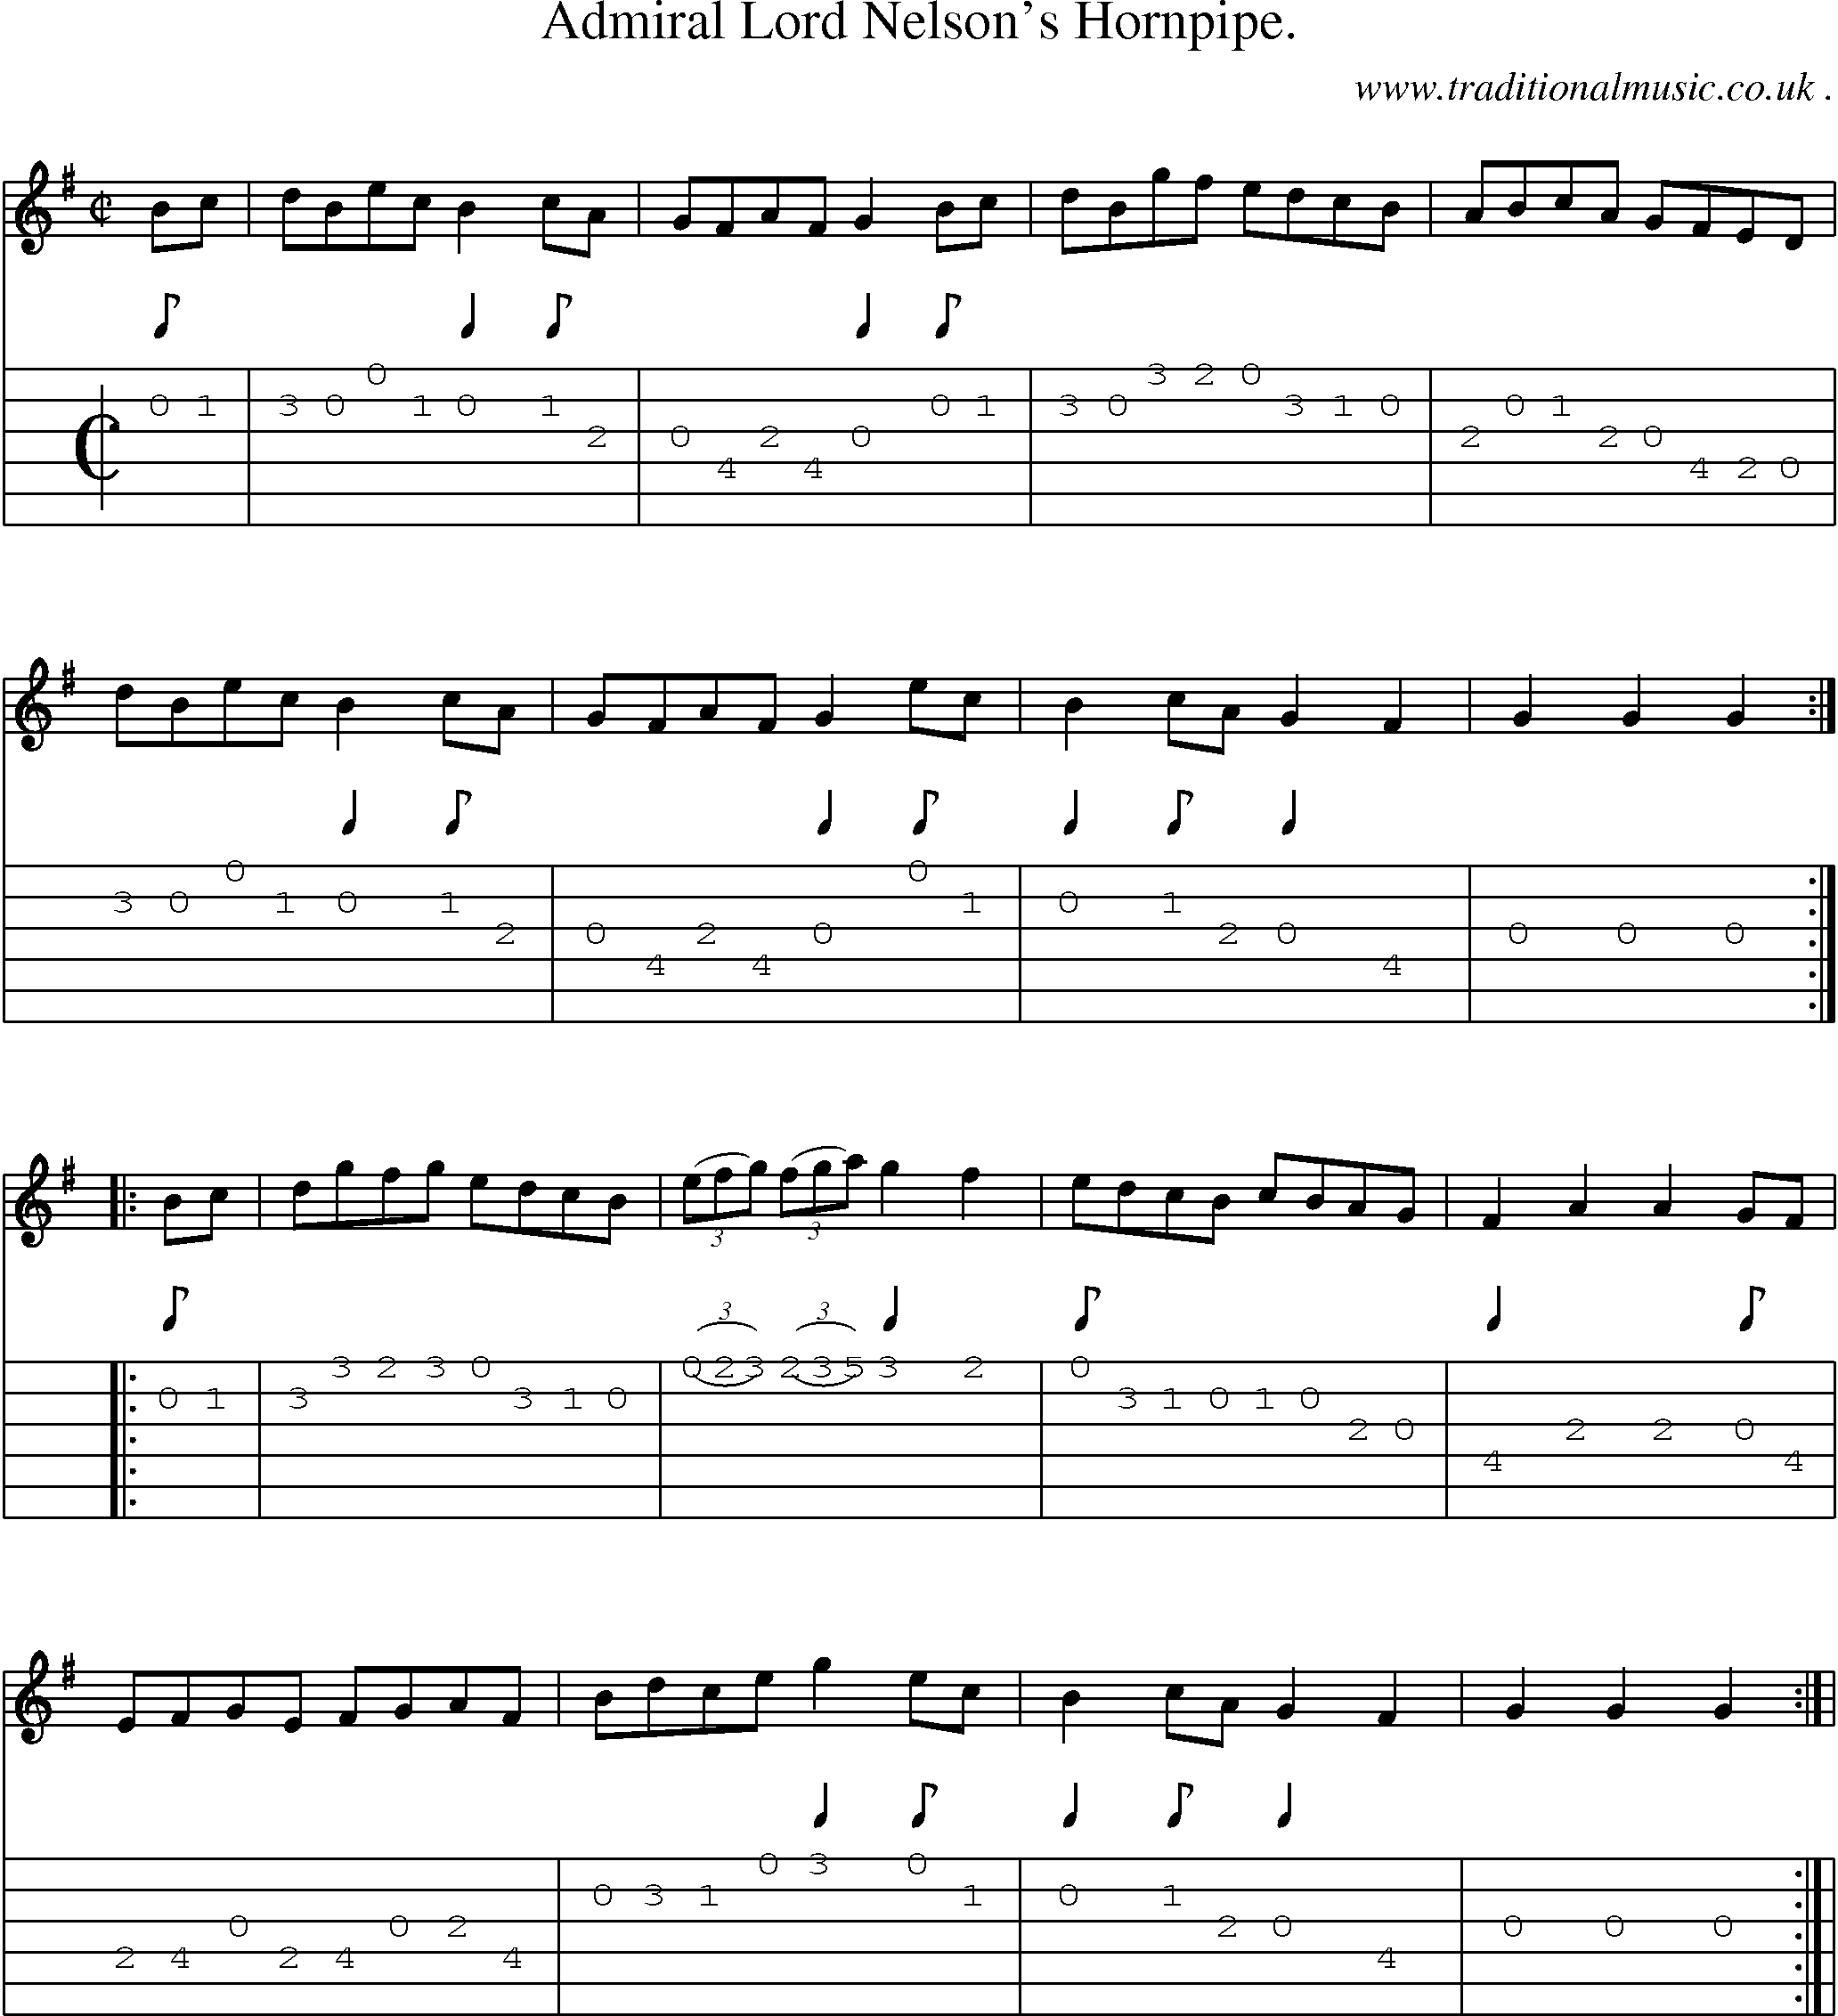 Sheet-Music and Guitar Tabs for Admiral Lord Nelsons Hornpipe